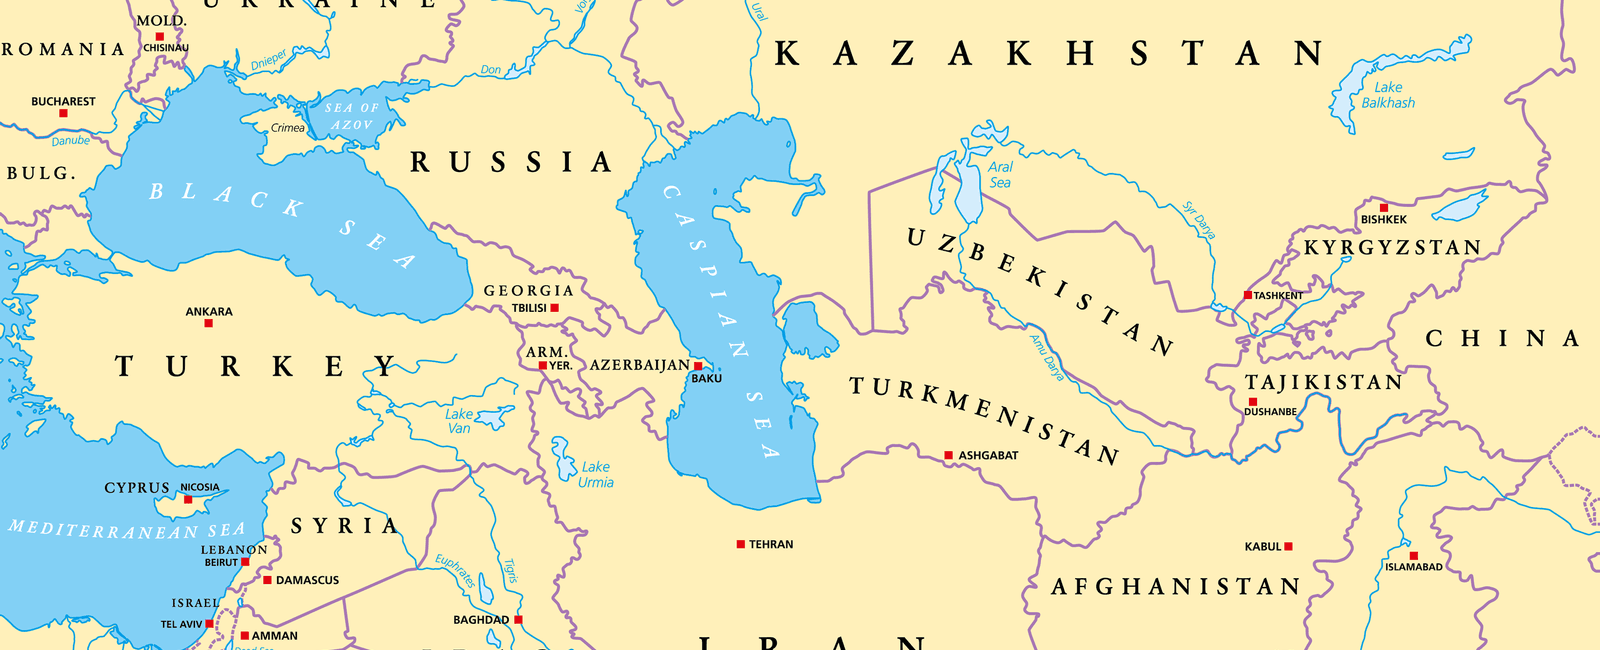 The caspian sea straddles the border between eastern europe and asia and borders 5 countries